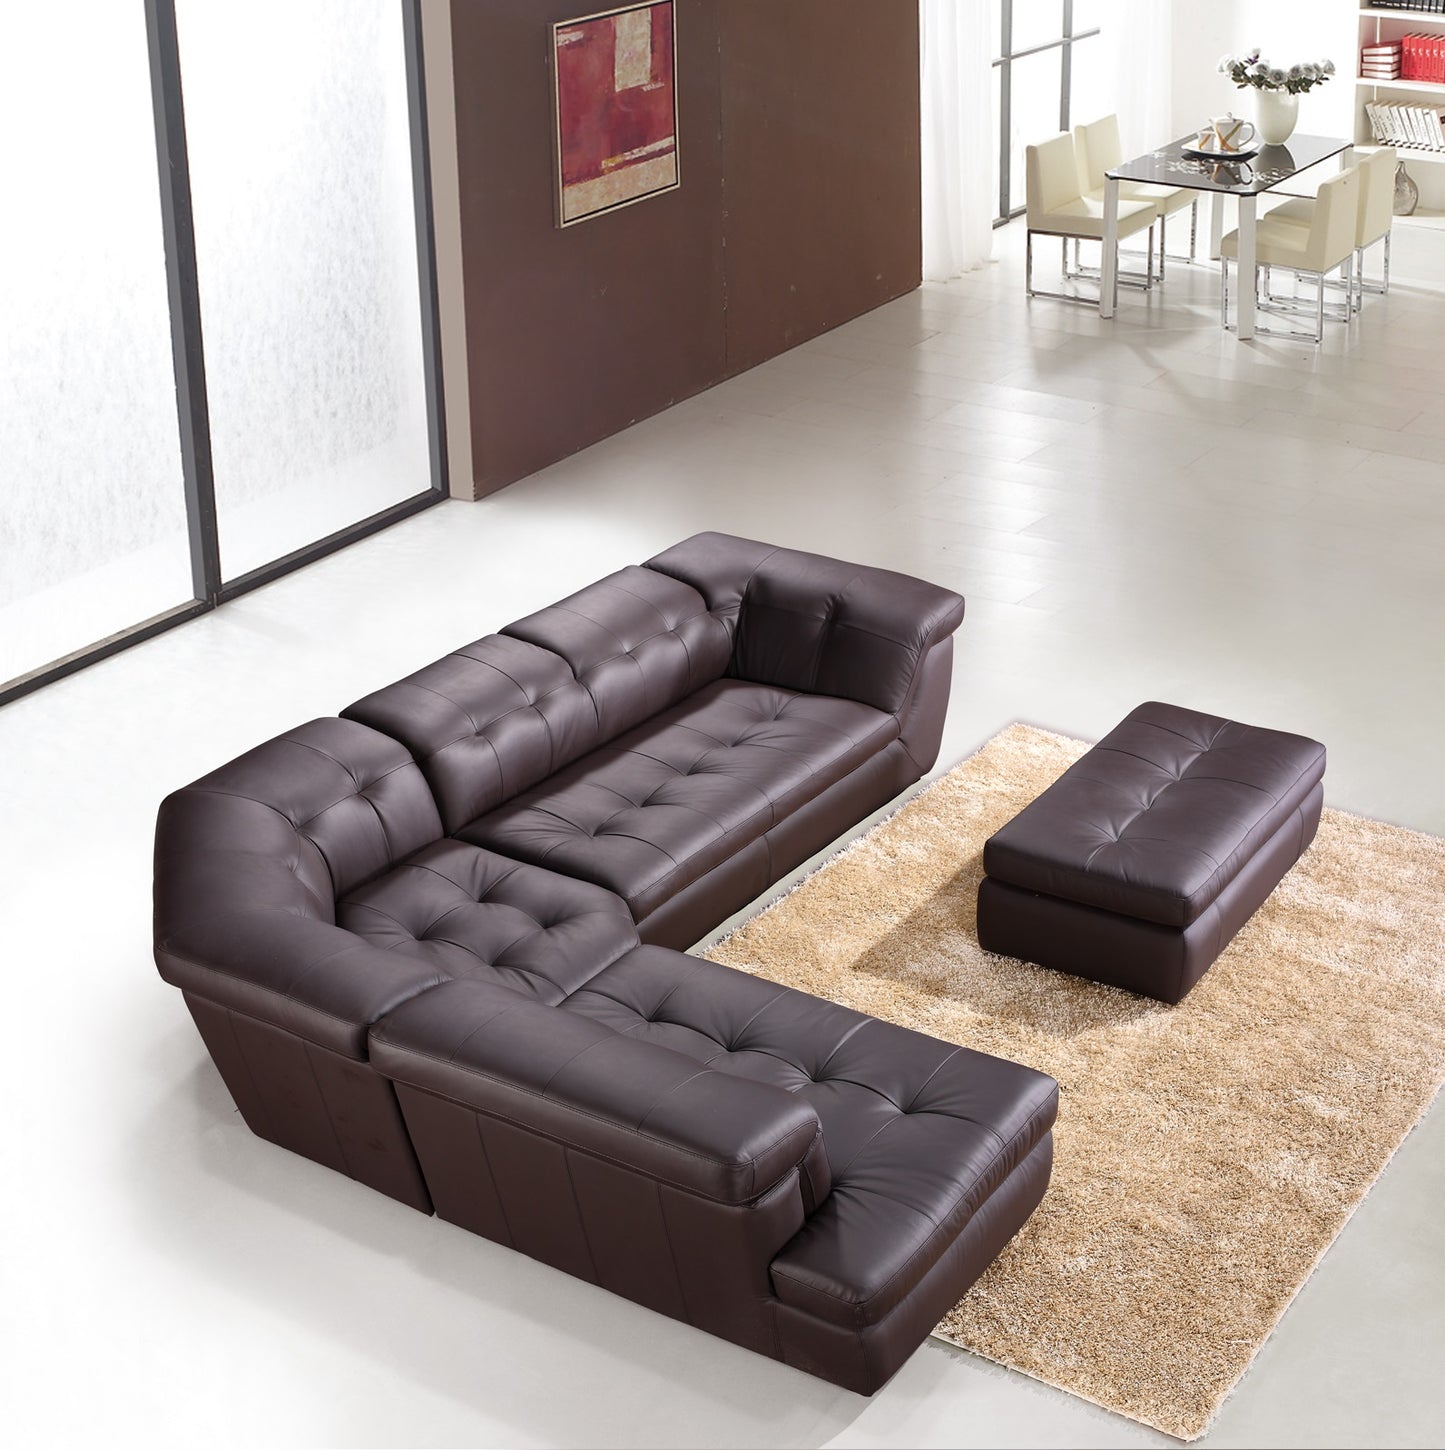 397 Italian Leather Sectional Sofa Chocolate Color LHF by JM